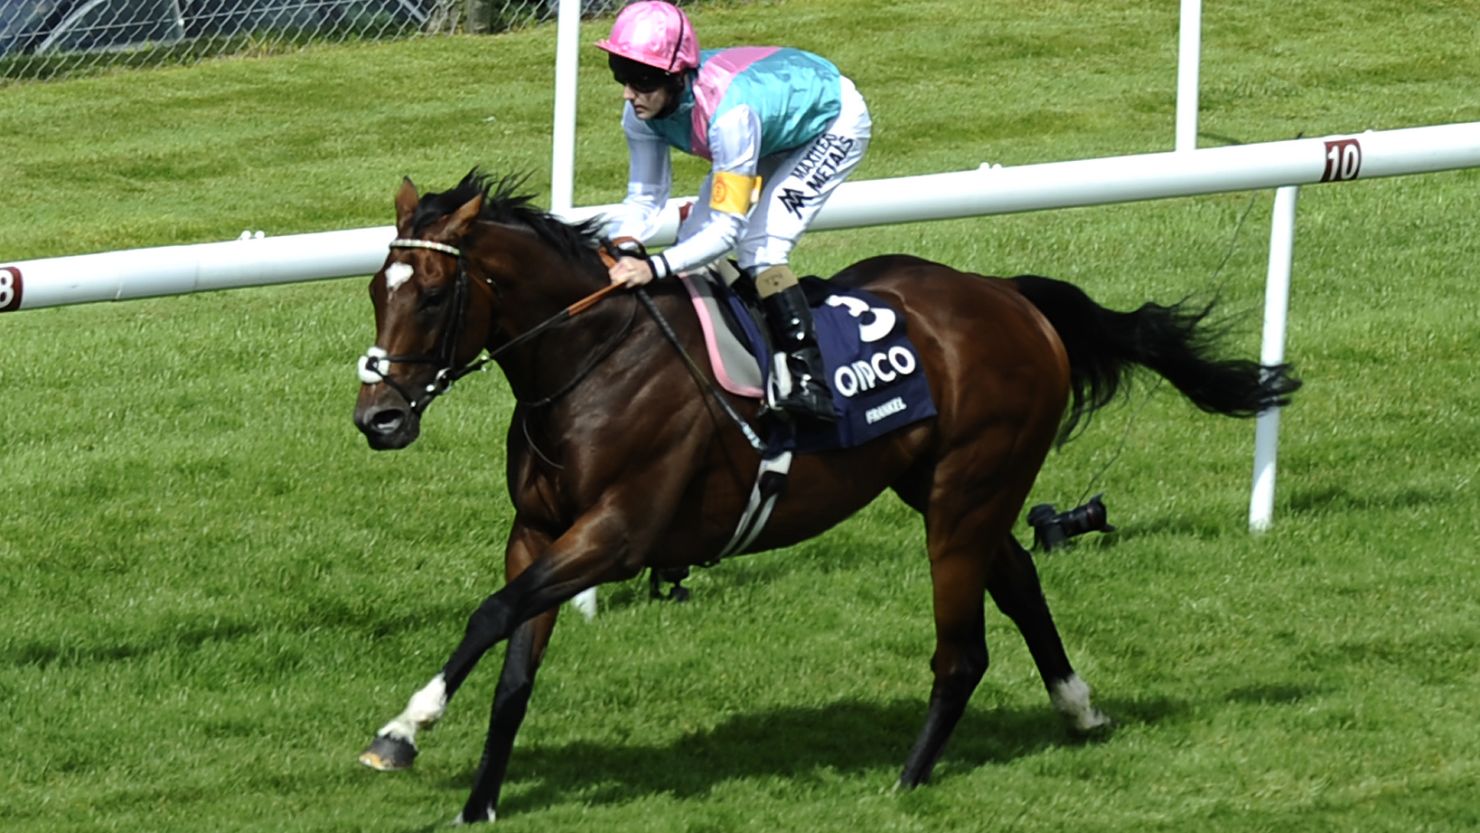 Tom Queally rode Frankel to victory at the Sussex Stakes at Goodwood racecourse in Chichester, England.